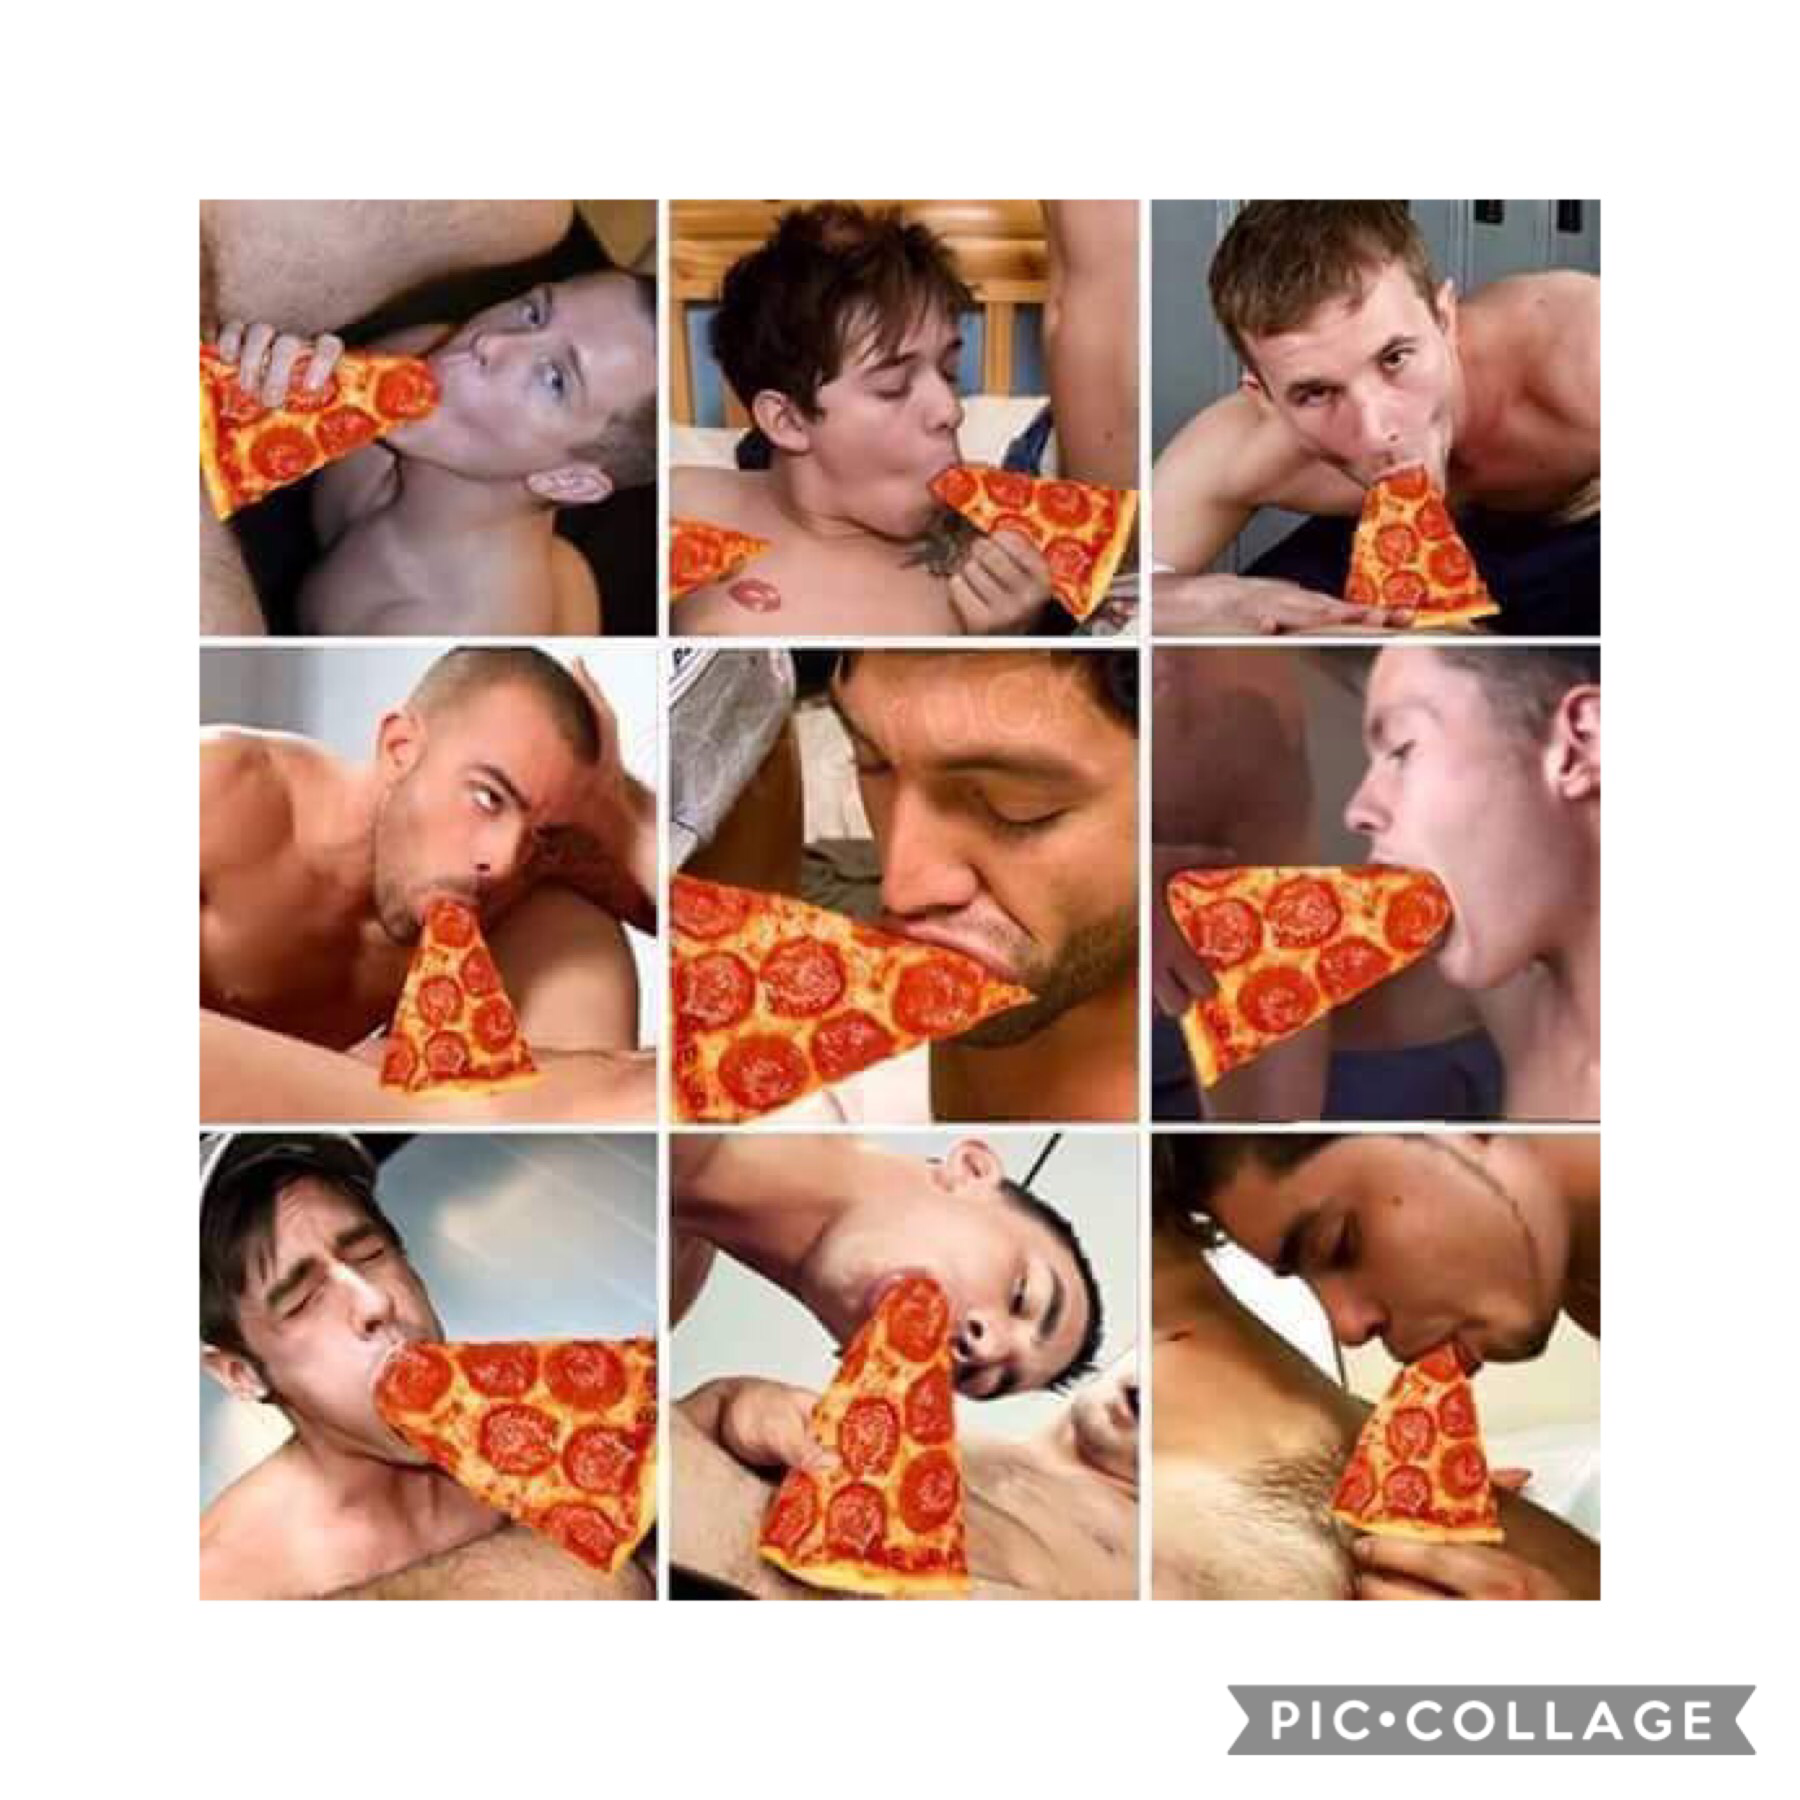 Just some people eatin pizza